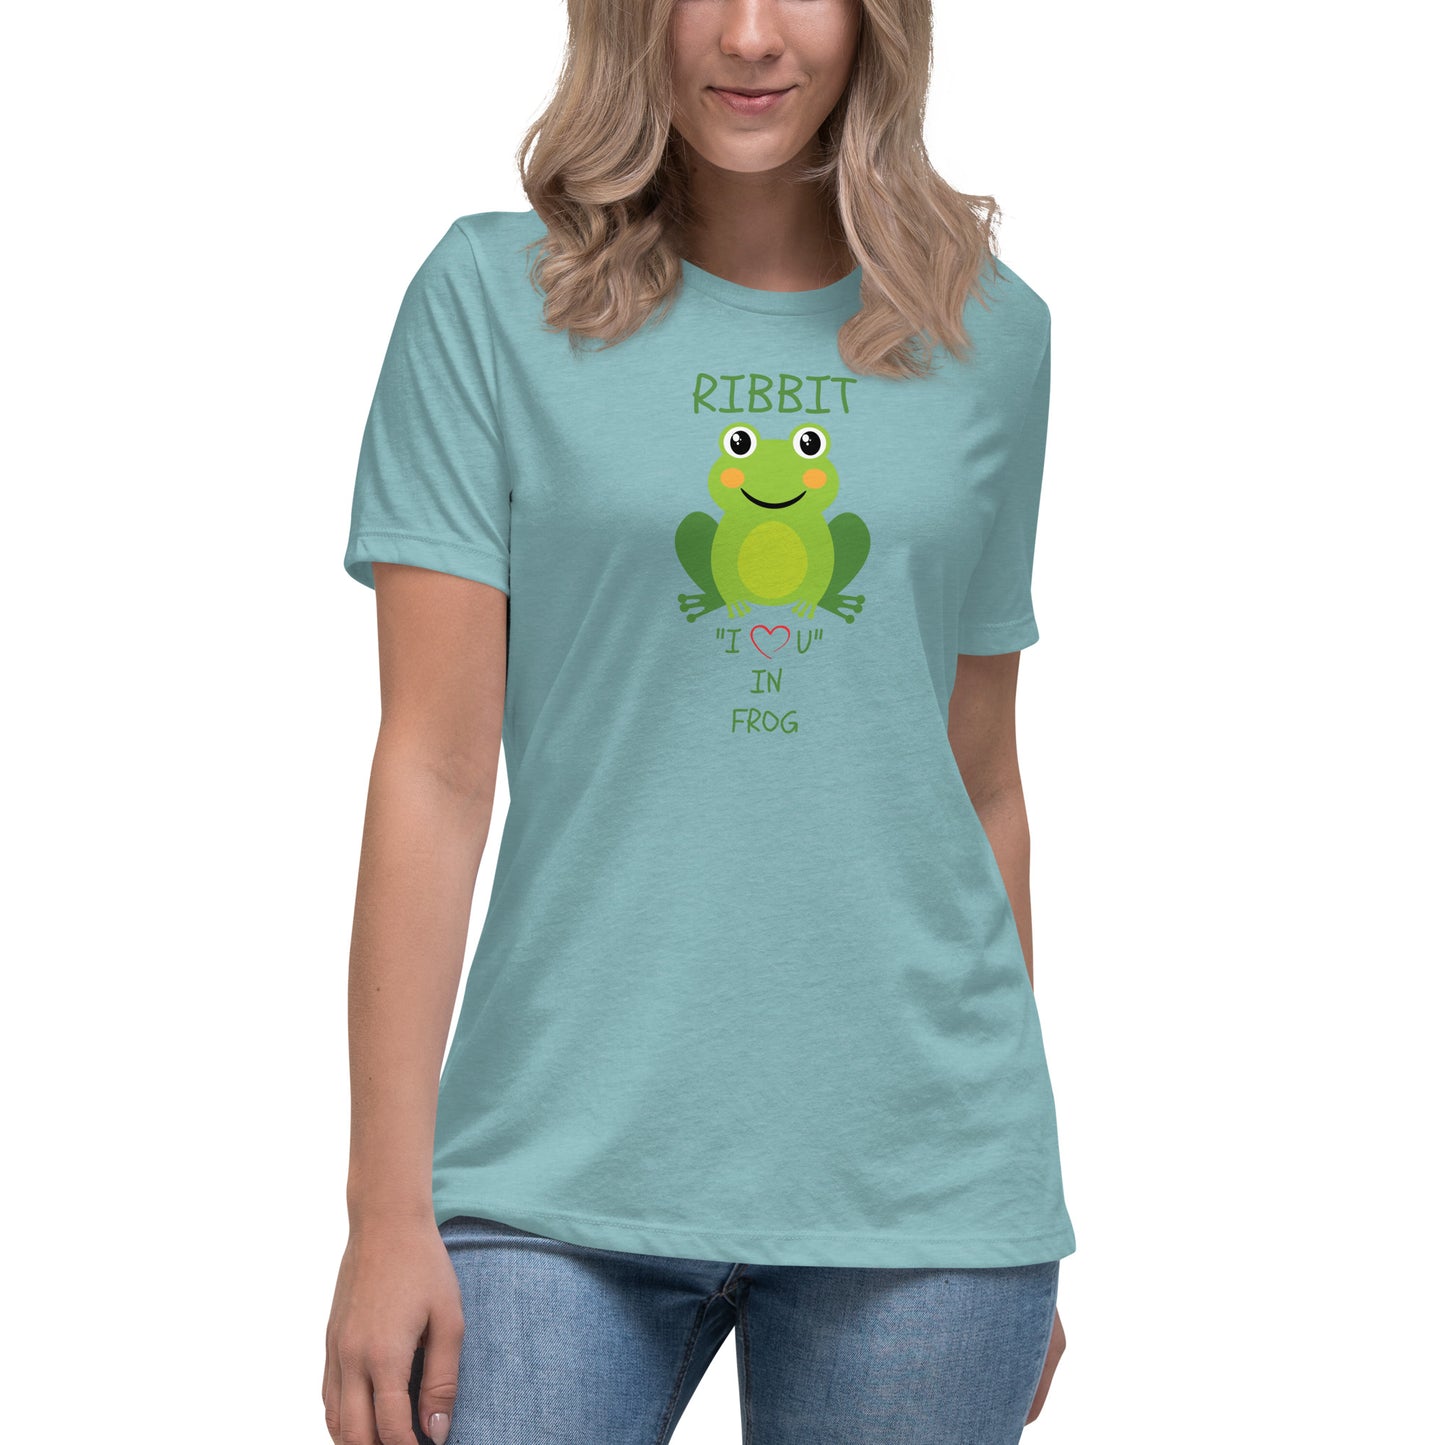 RIBBIT "I LOVE U" IN FROG Women's Relaxed T-Shirt